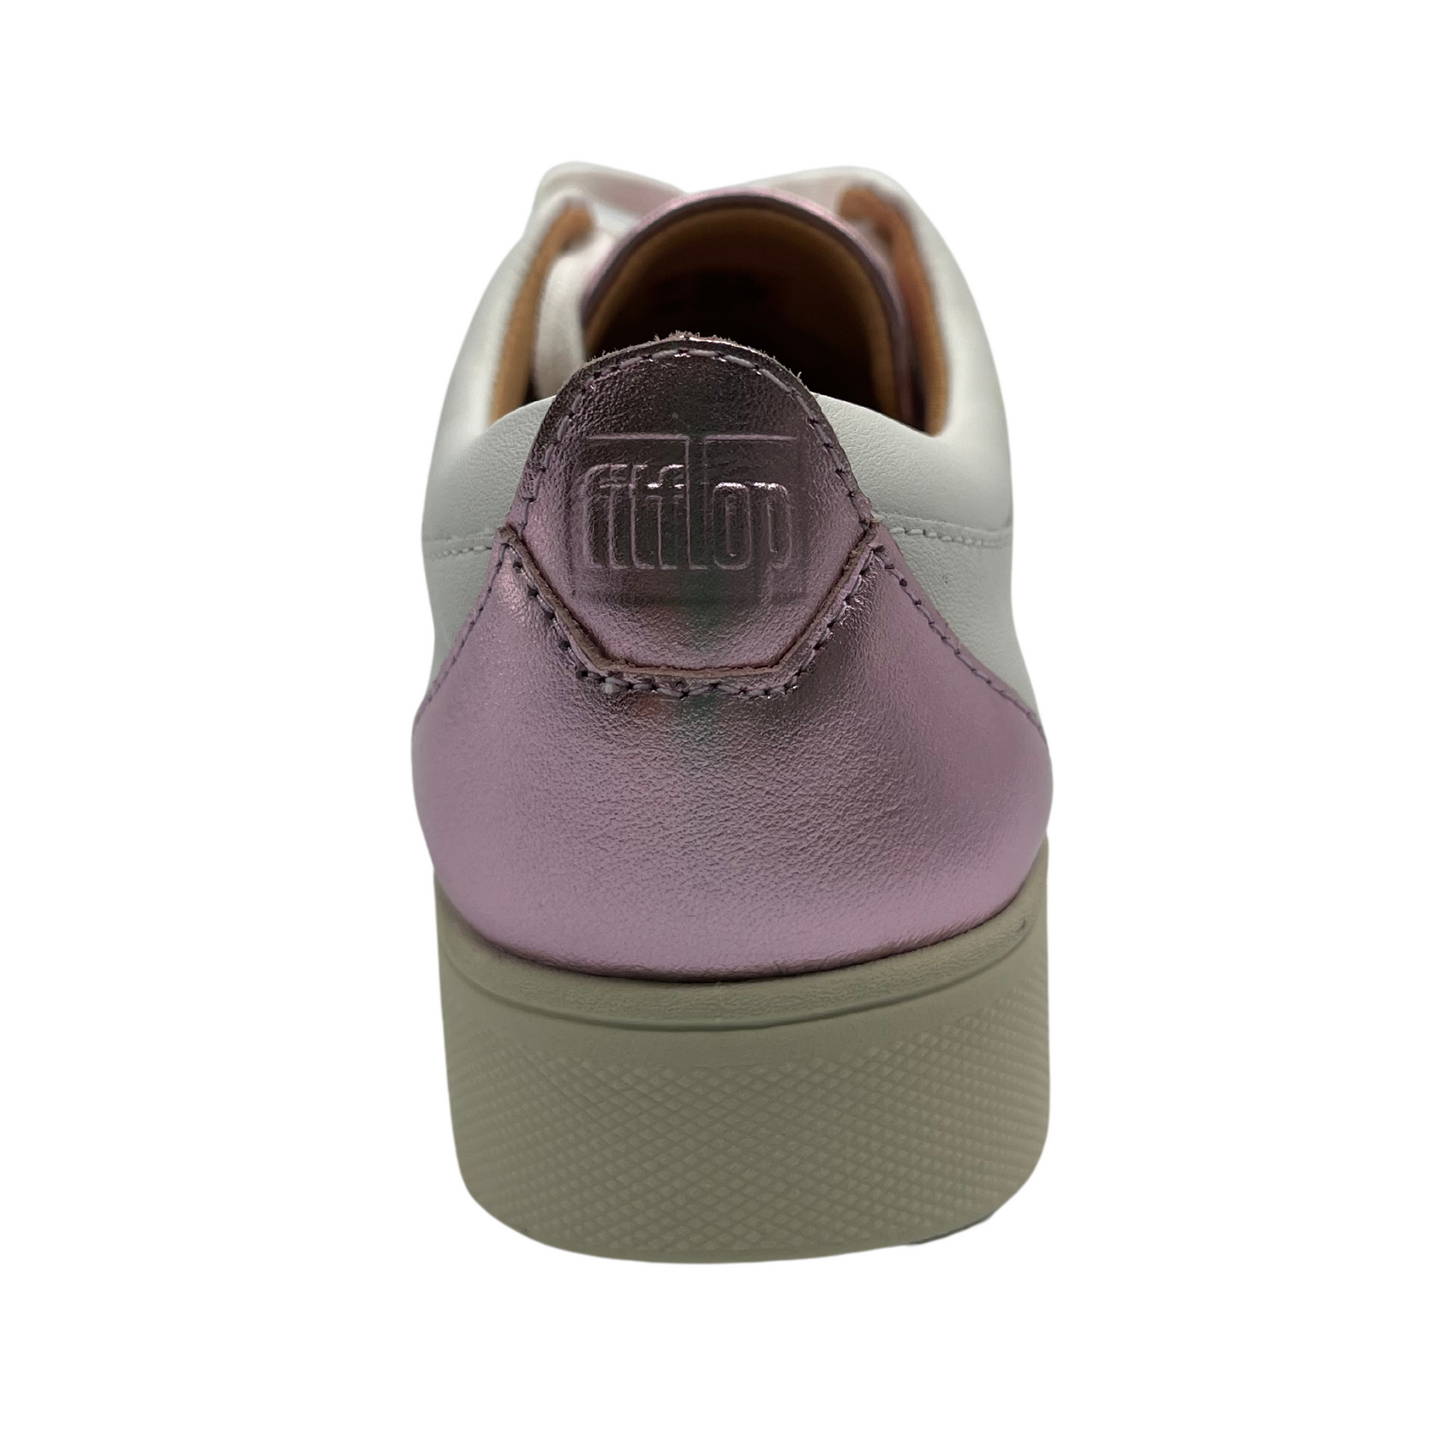 Back view of white leather sneakers with white laces, rubber outsole and metallic lilac detail on heel